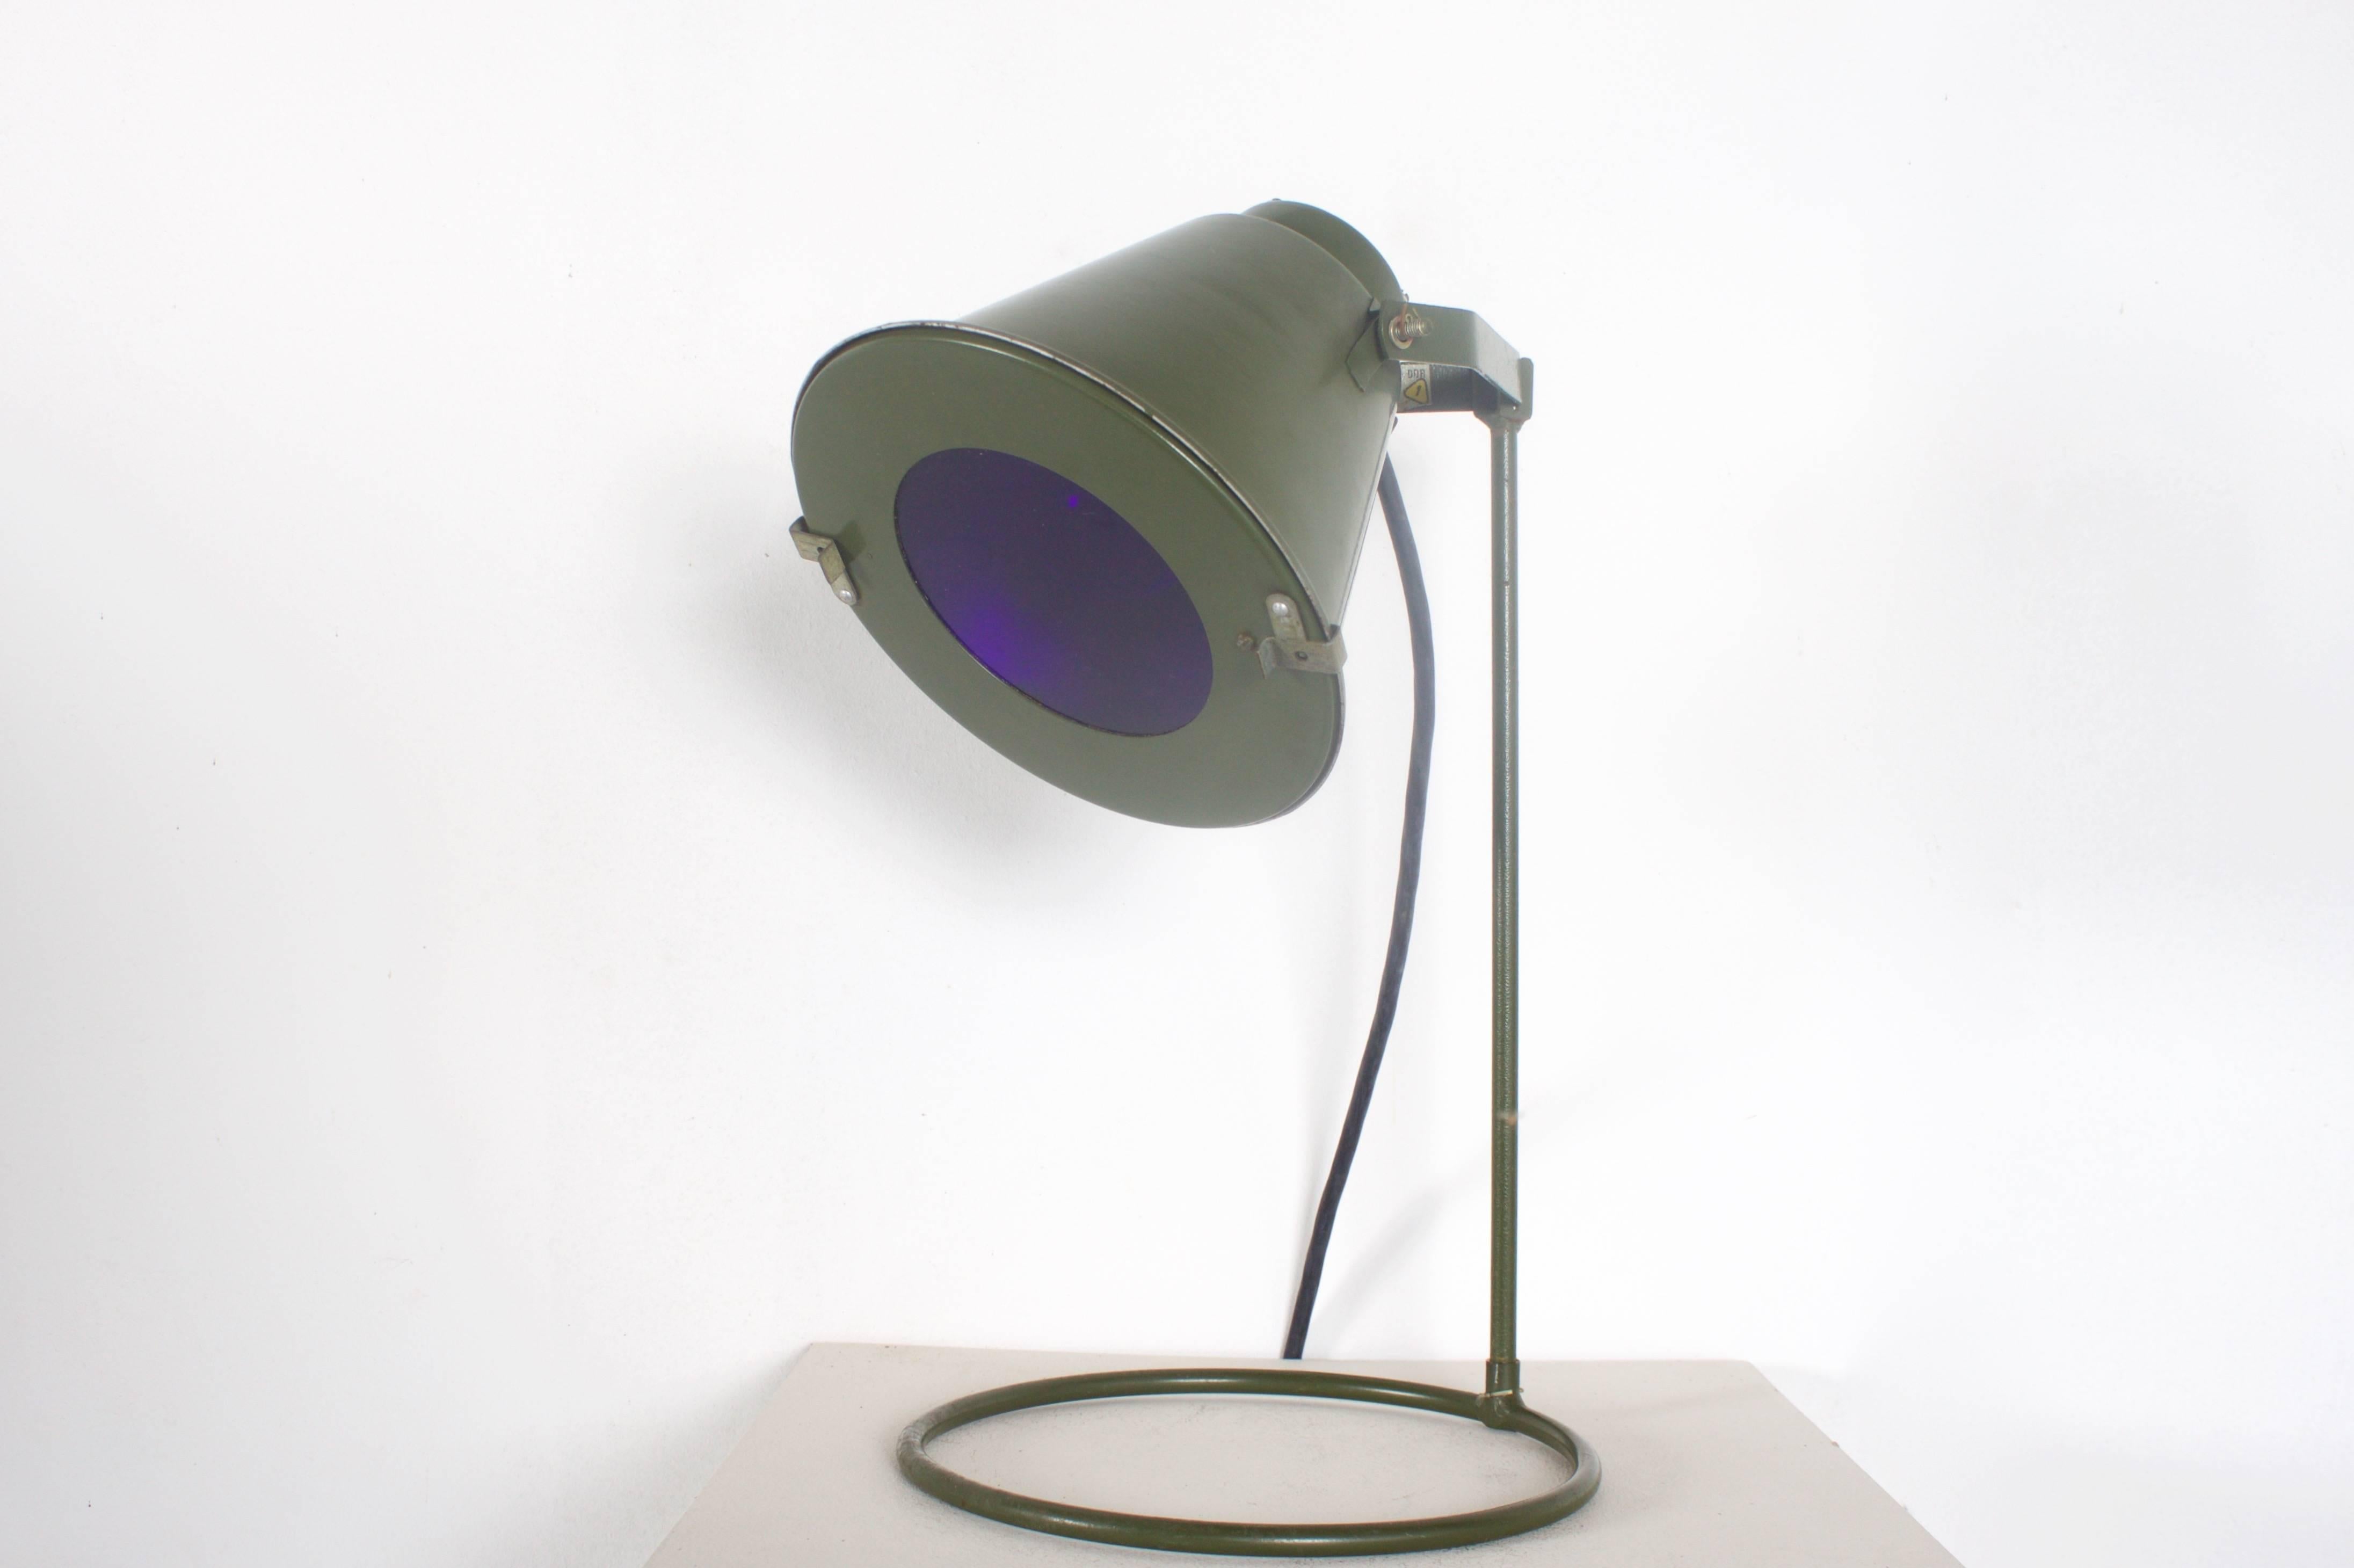 Rare DDR landing lamp used by the 'Nationale Volksarmee' (NVA) in the 1970s.

Four items available.

The lamp can be used as a desk or table lamp.

It comes with the original blue lens and an additional lens in clear glass. 

The aluminium